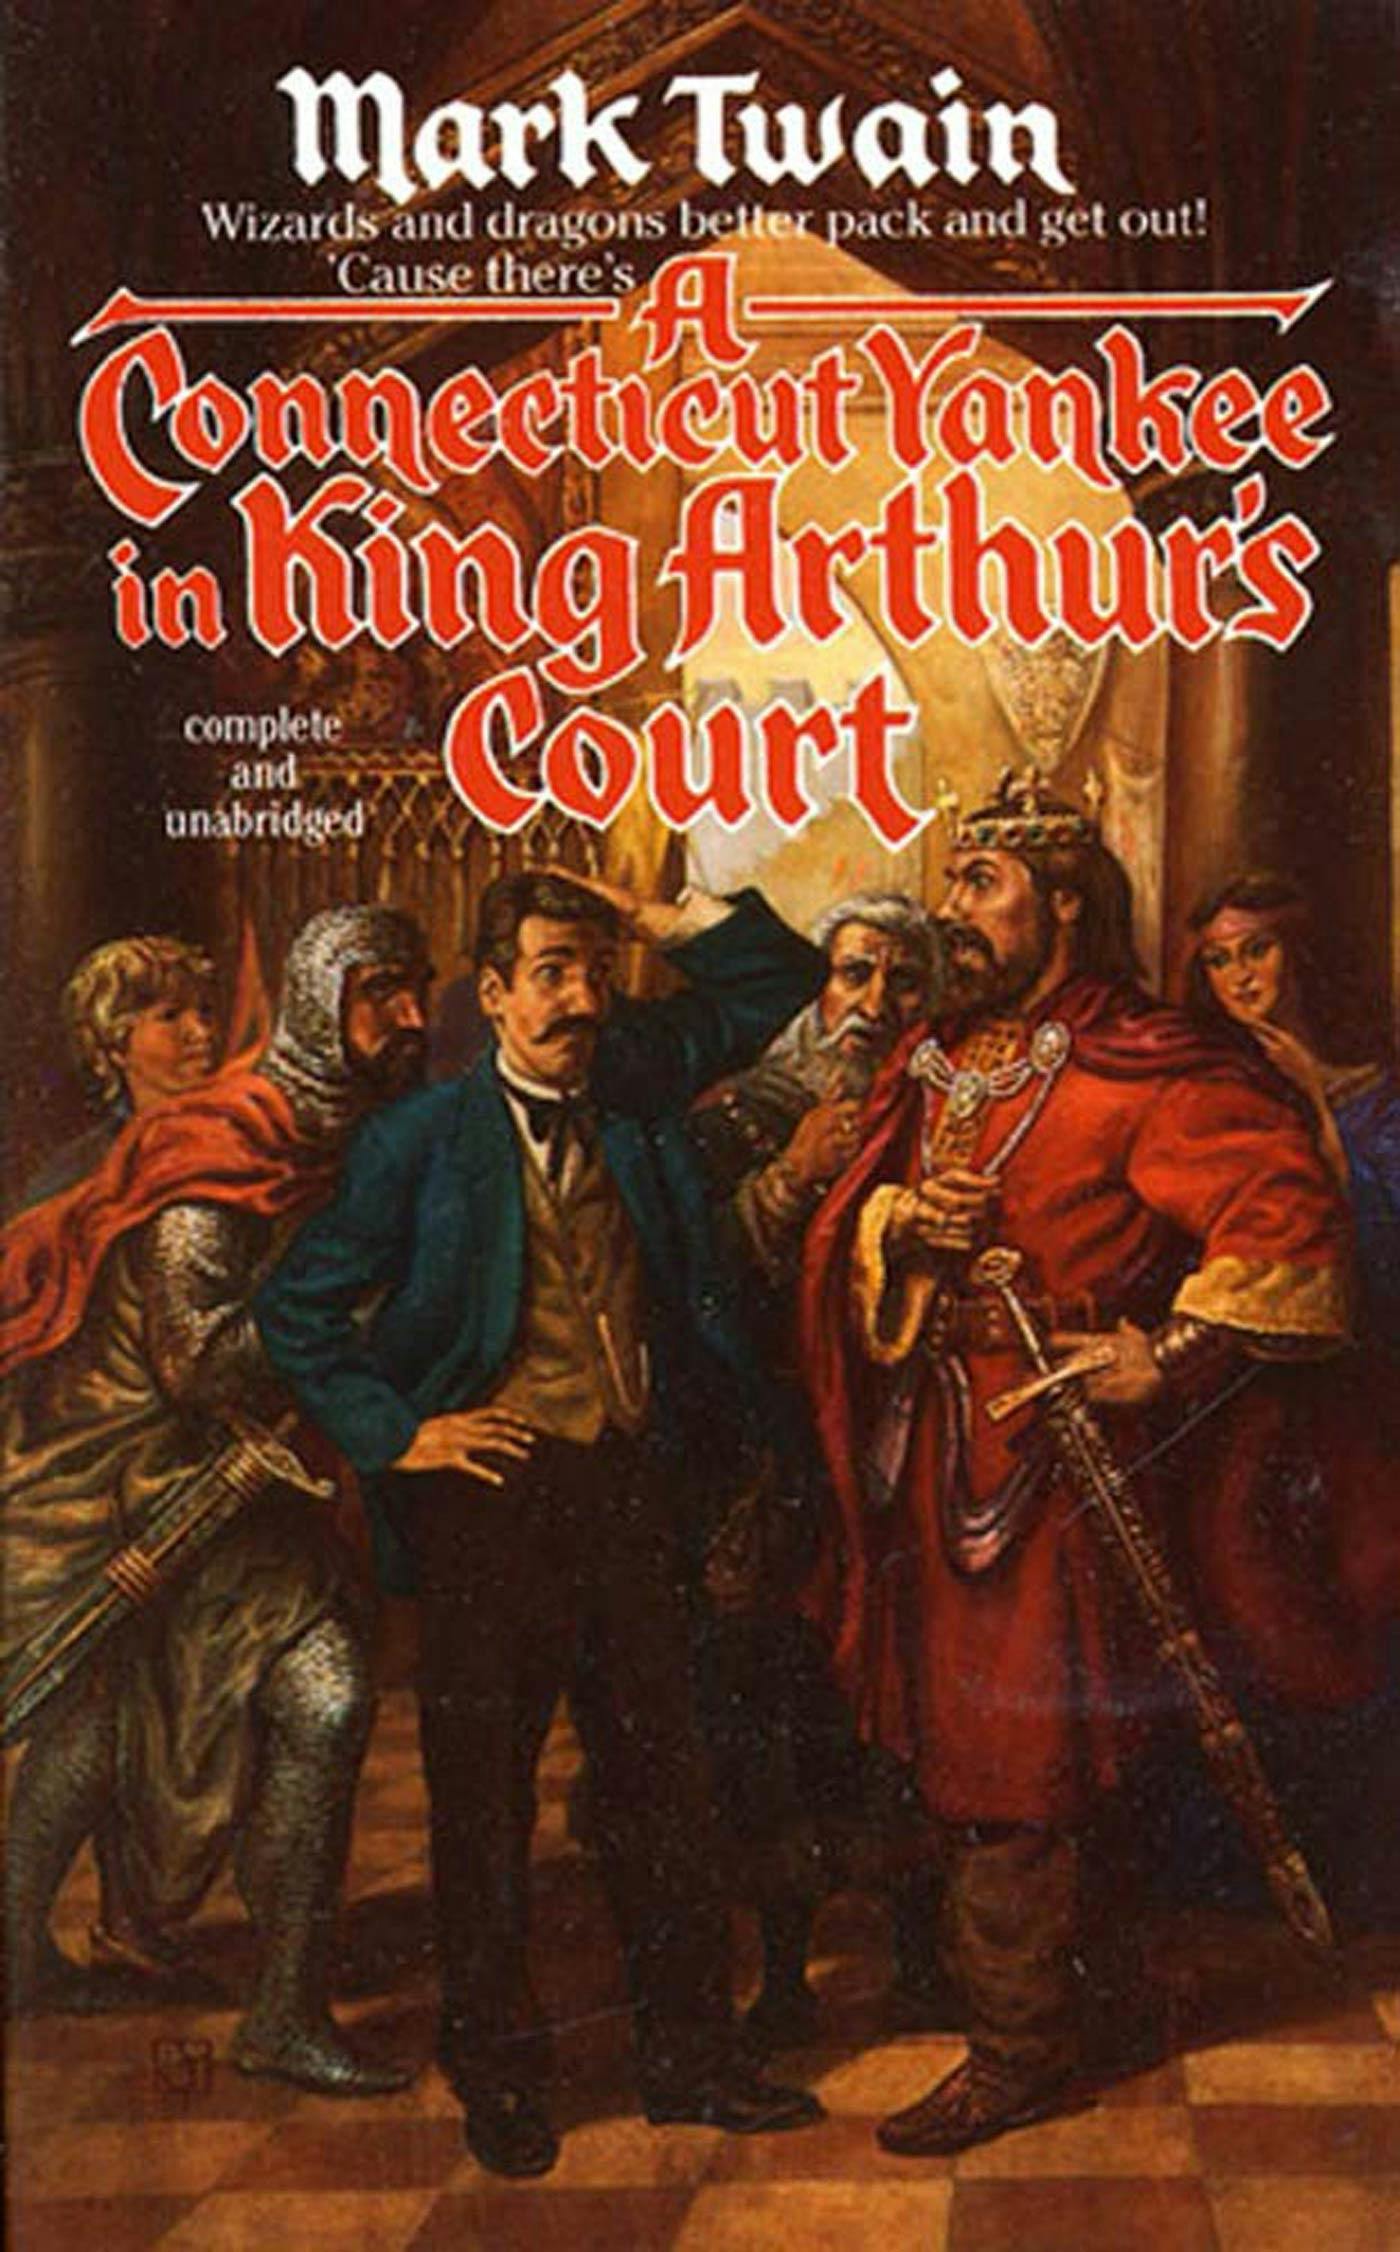 A Connecticut Yankee in King Arthur #39 s Court